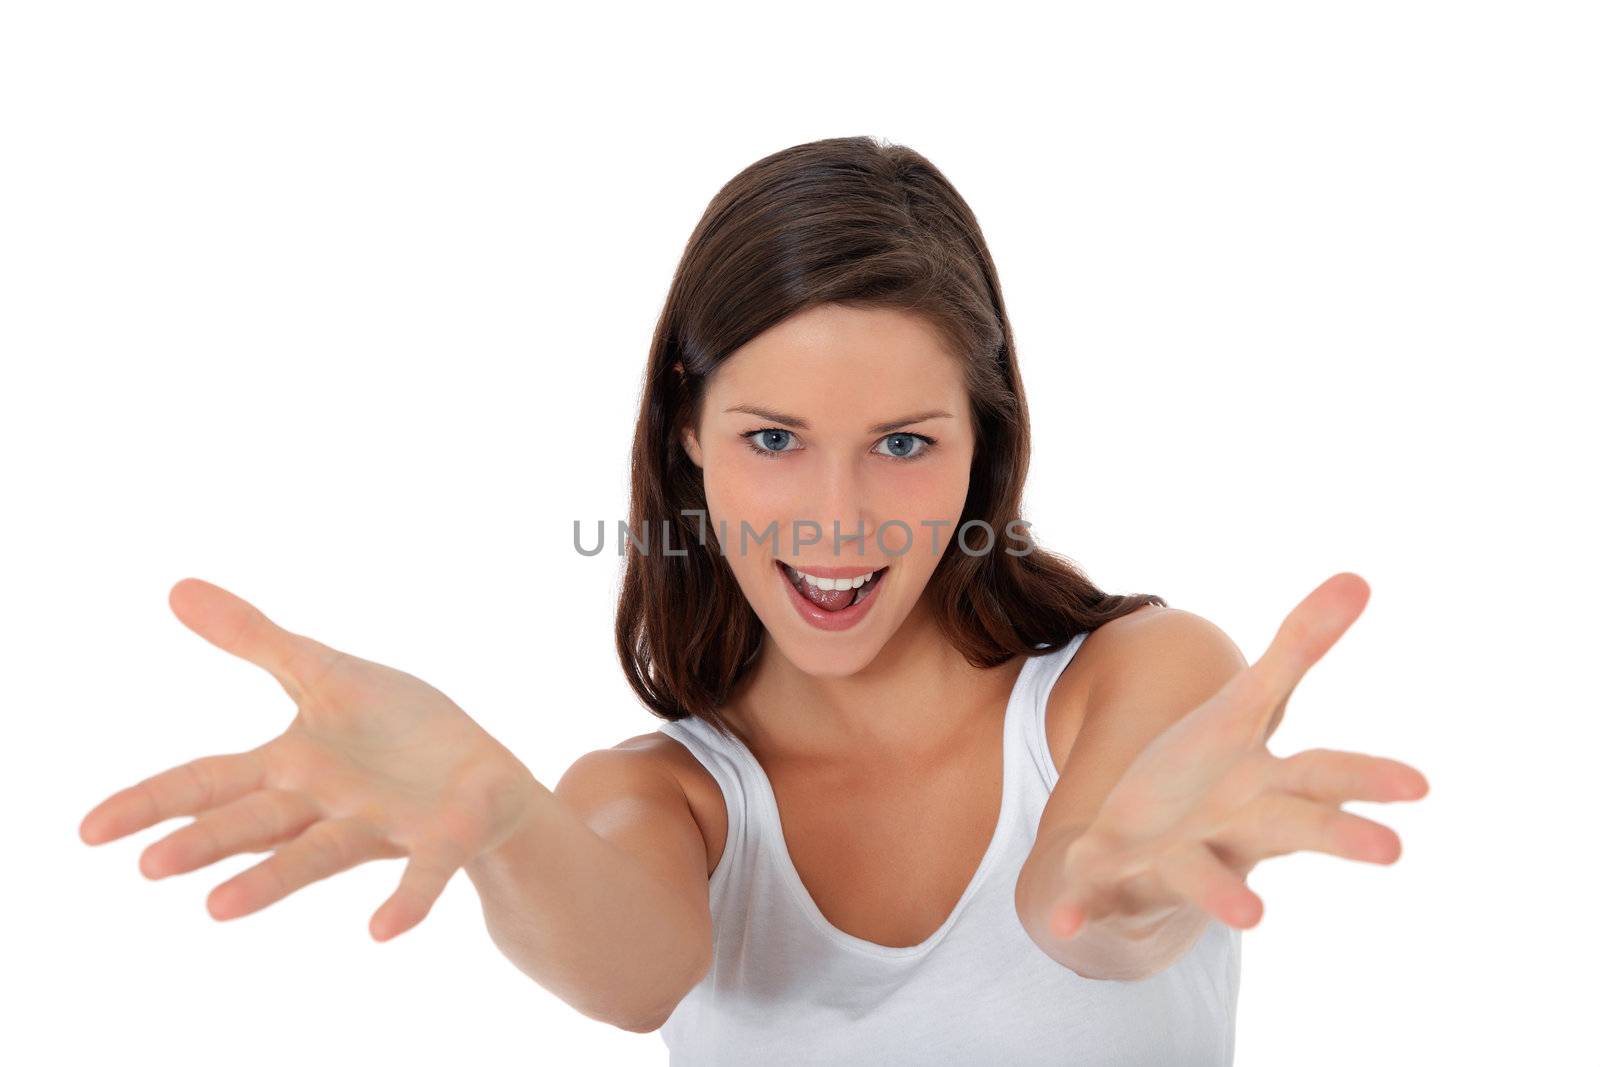 Attractive young woman with welcoming gesture. All on white background.